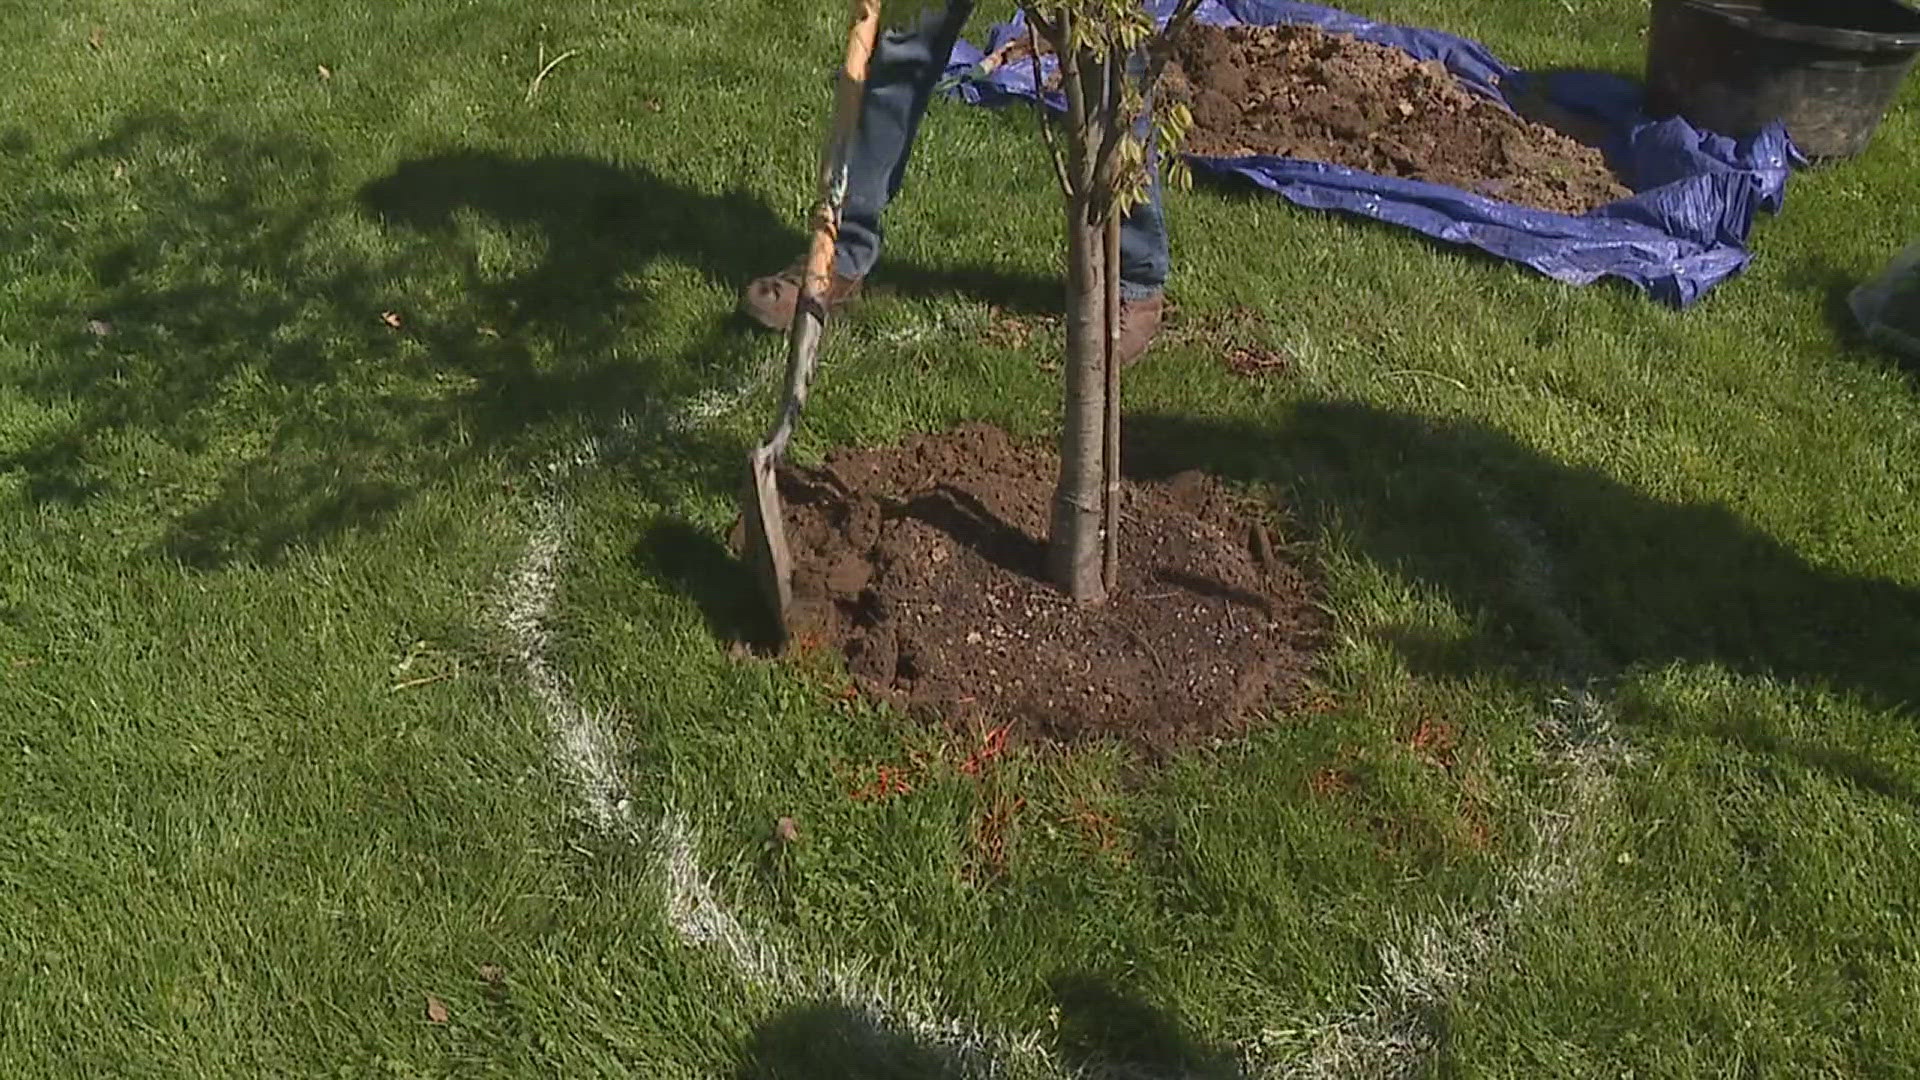 The two trees were donated by the City of Moline.